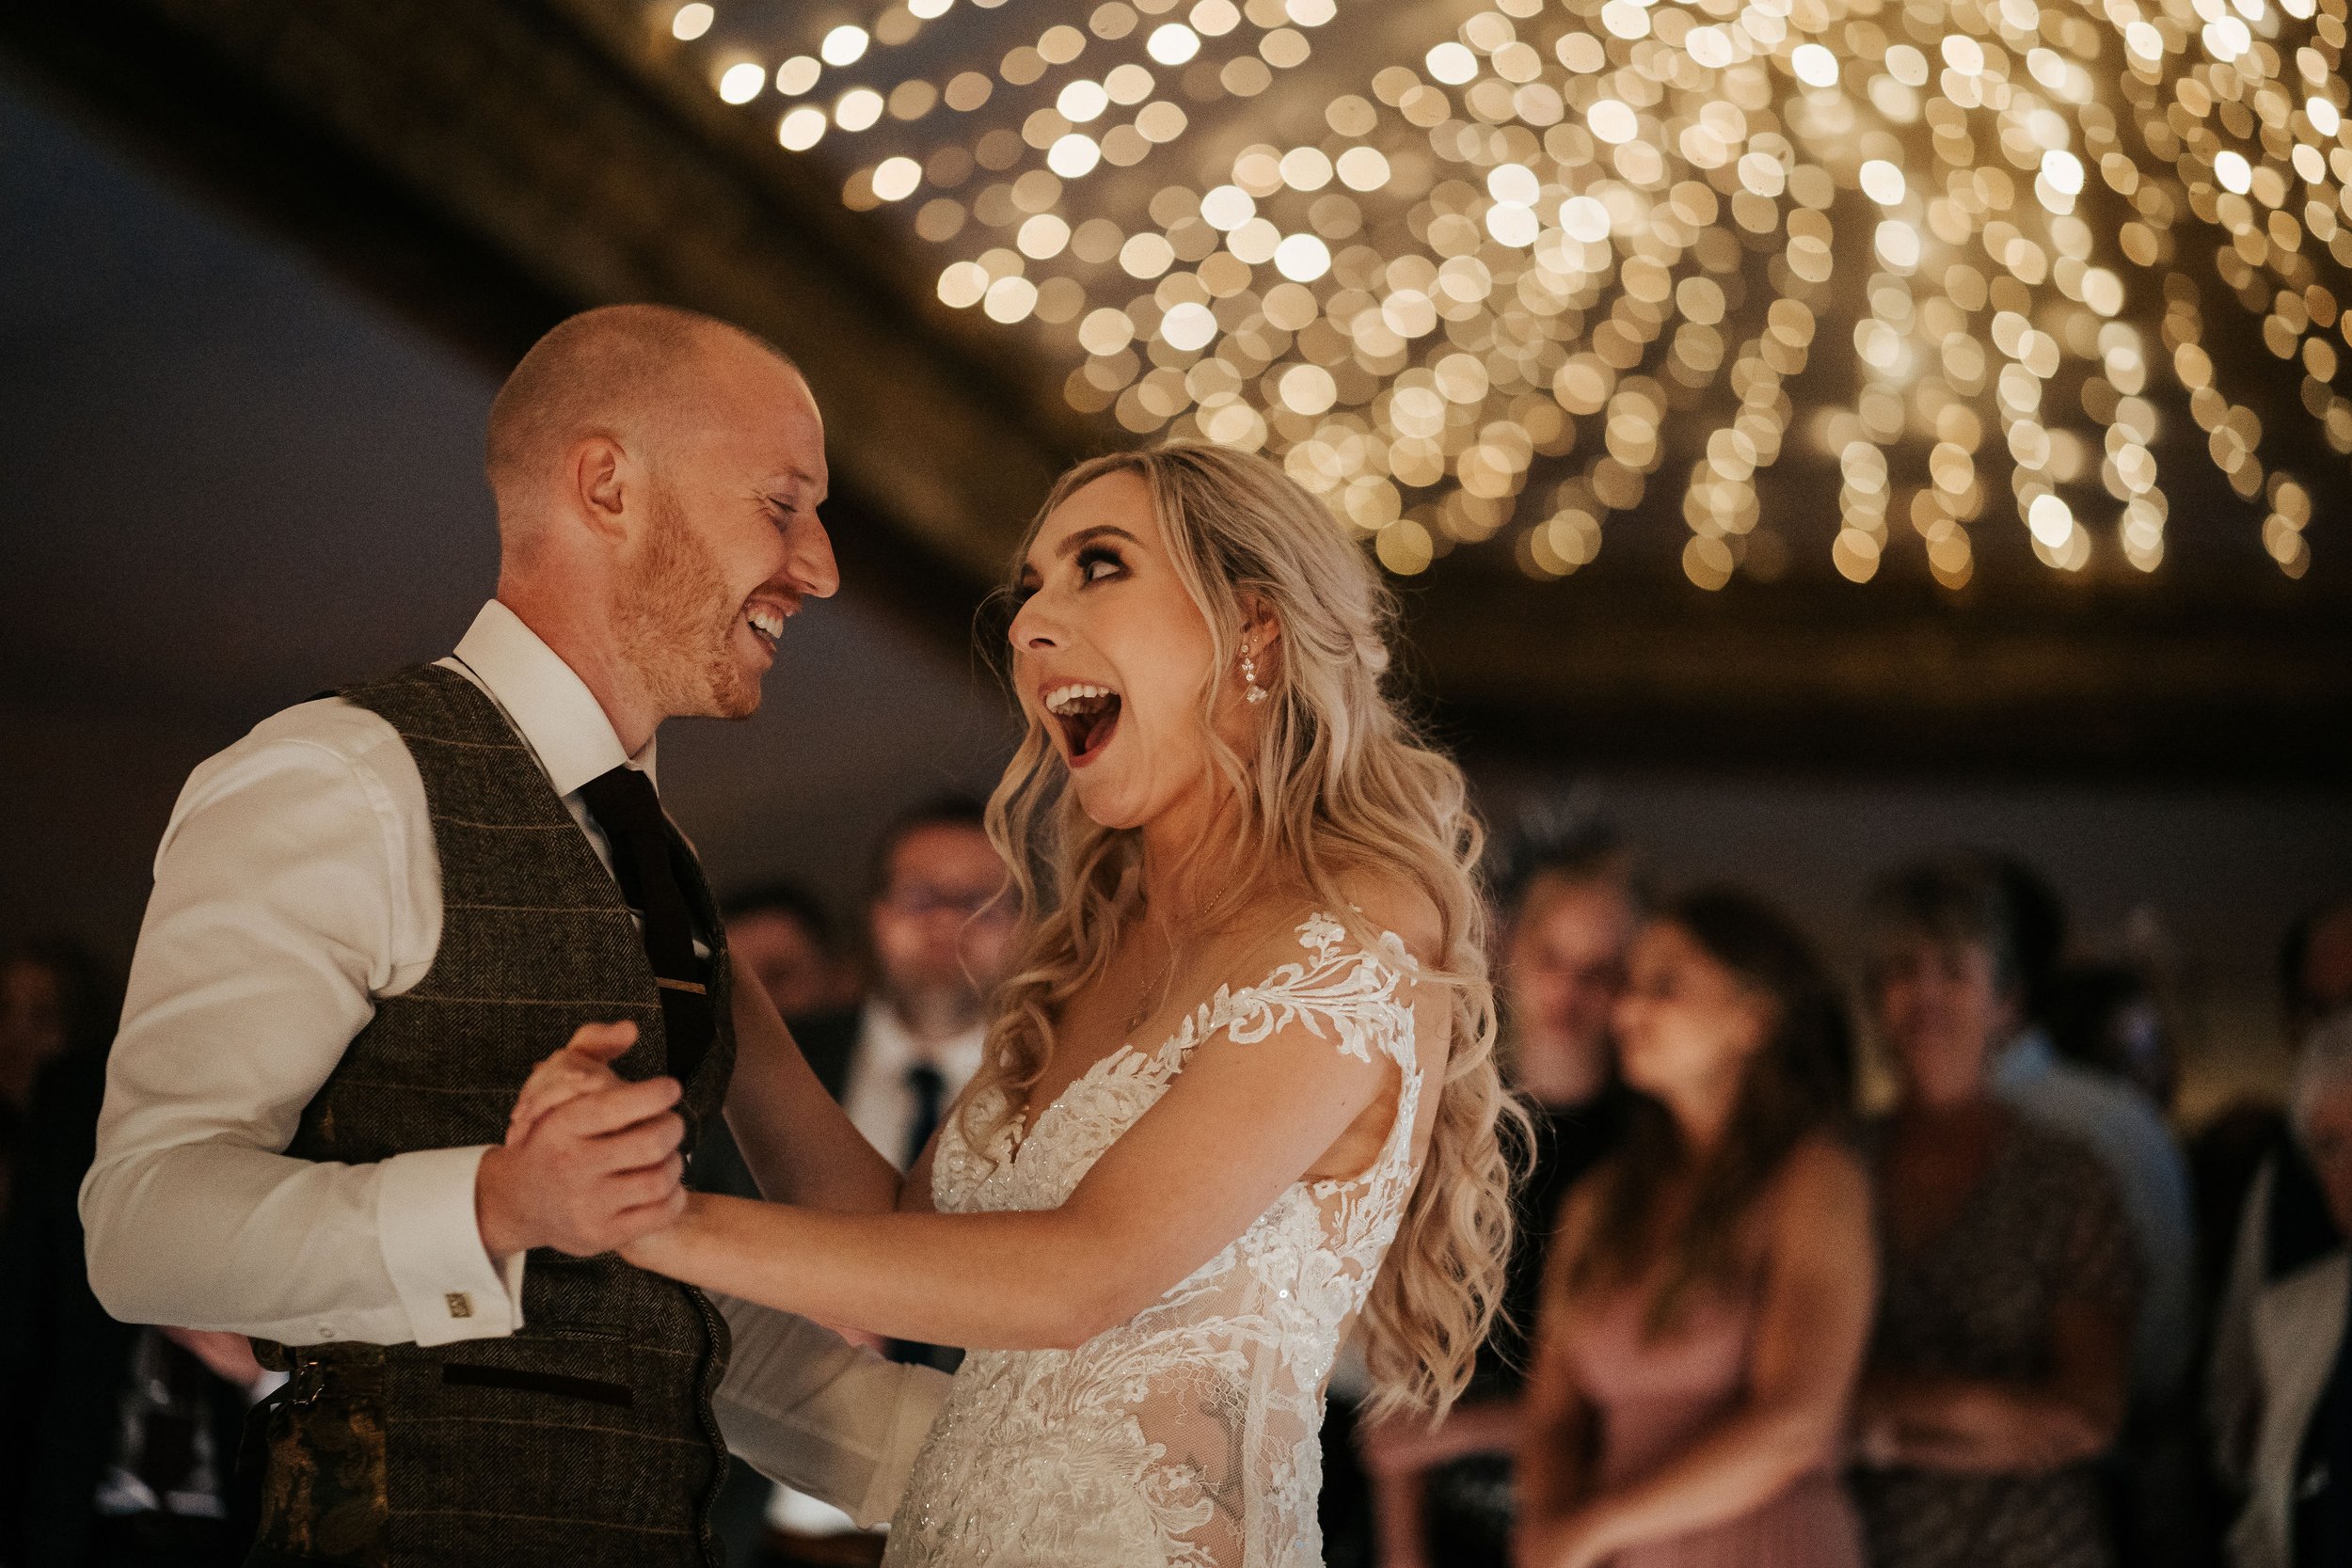 Smiles all round as bride and groom dance in The Normans Grain Shed. Image by photographybycharli.com.jpg